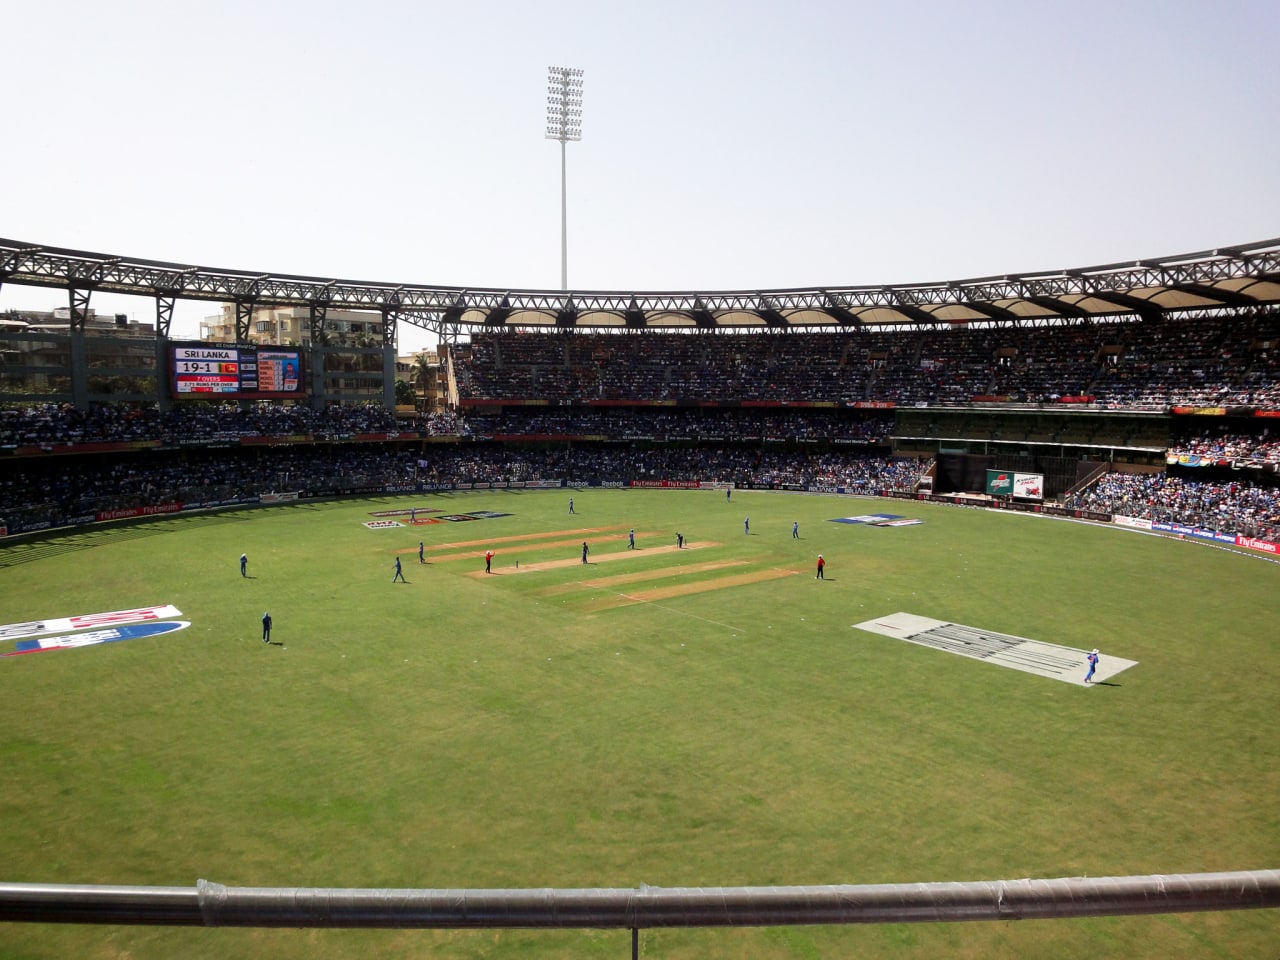 wankhede stadium pitch report